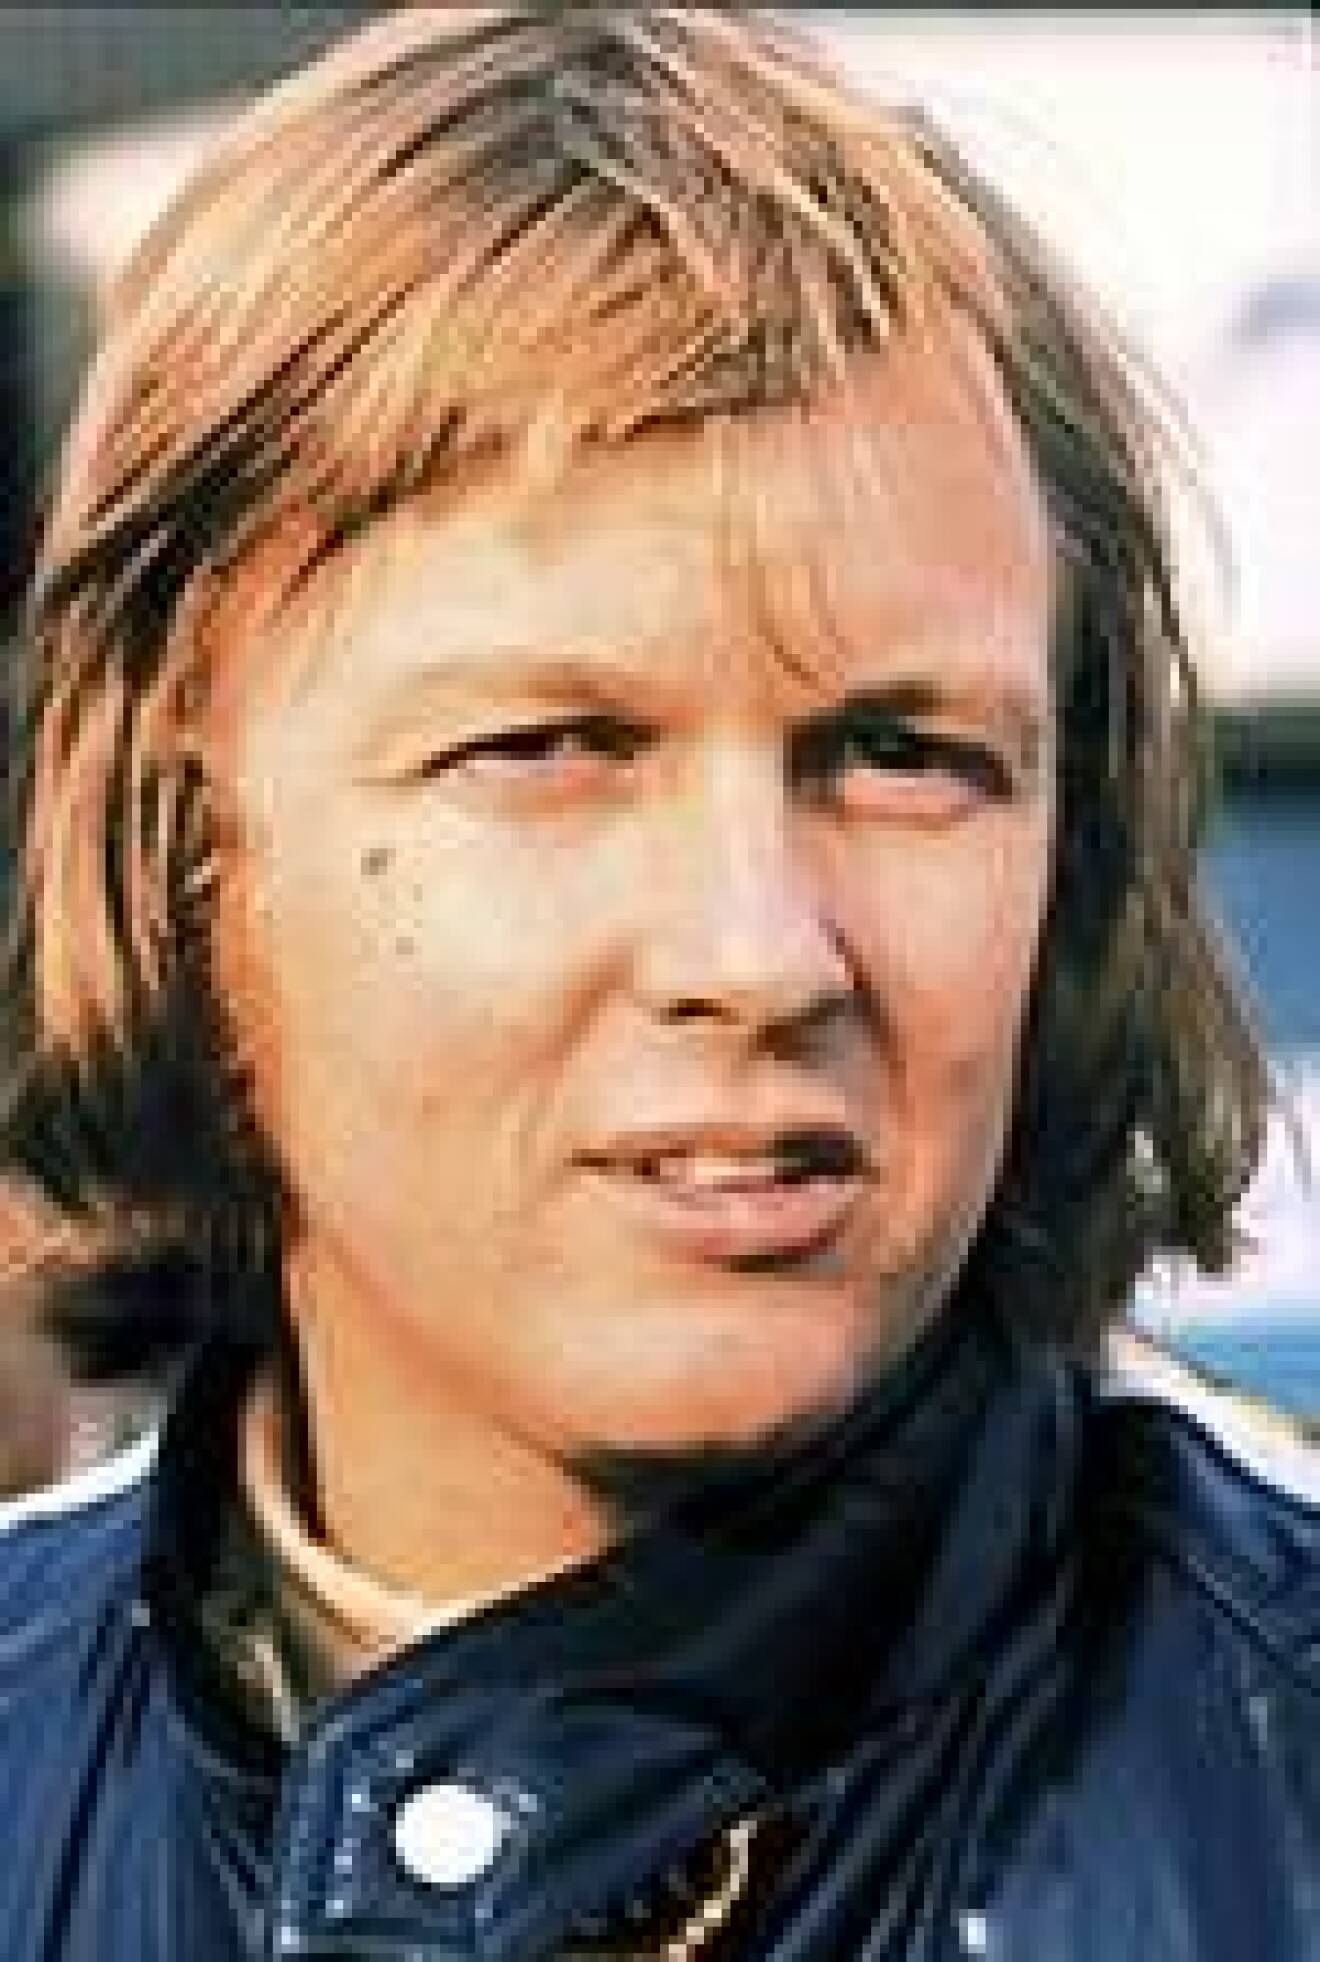 Ronnie Peterson.